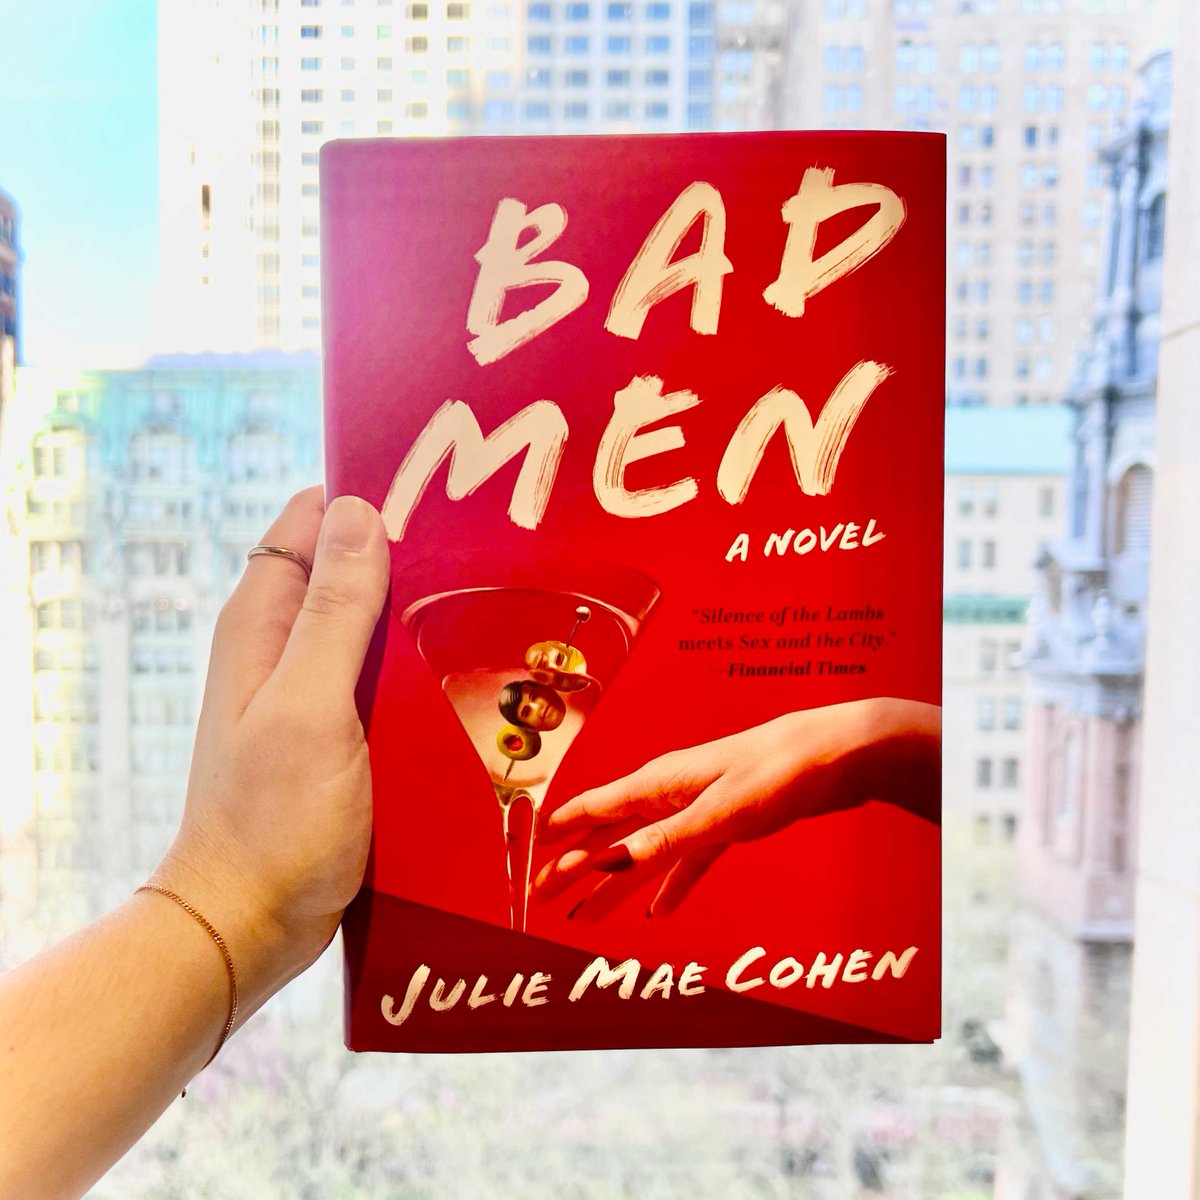 Meet the most irresistible serial killer of the year in the feminist thriller BAD MEN by award-winning author @julie_cohen. Get your copy of this darkly funny read today! bit.ly/44ooTLN